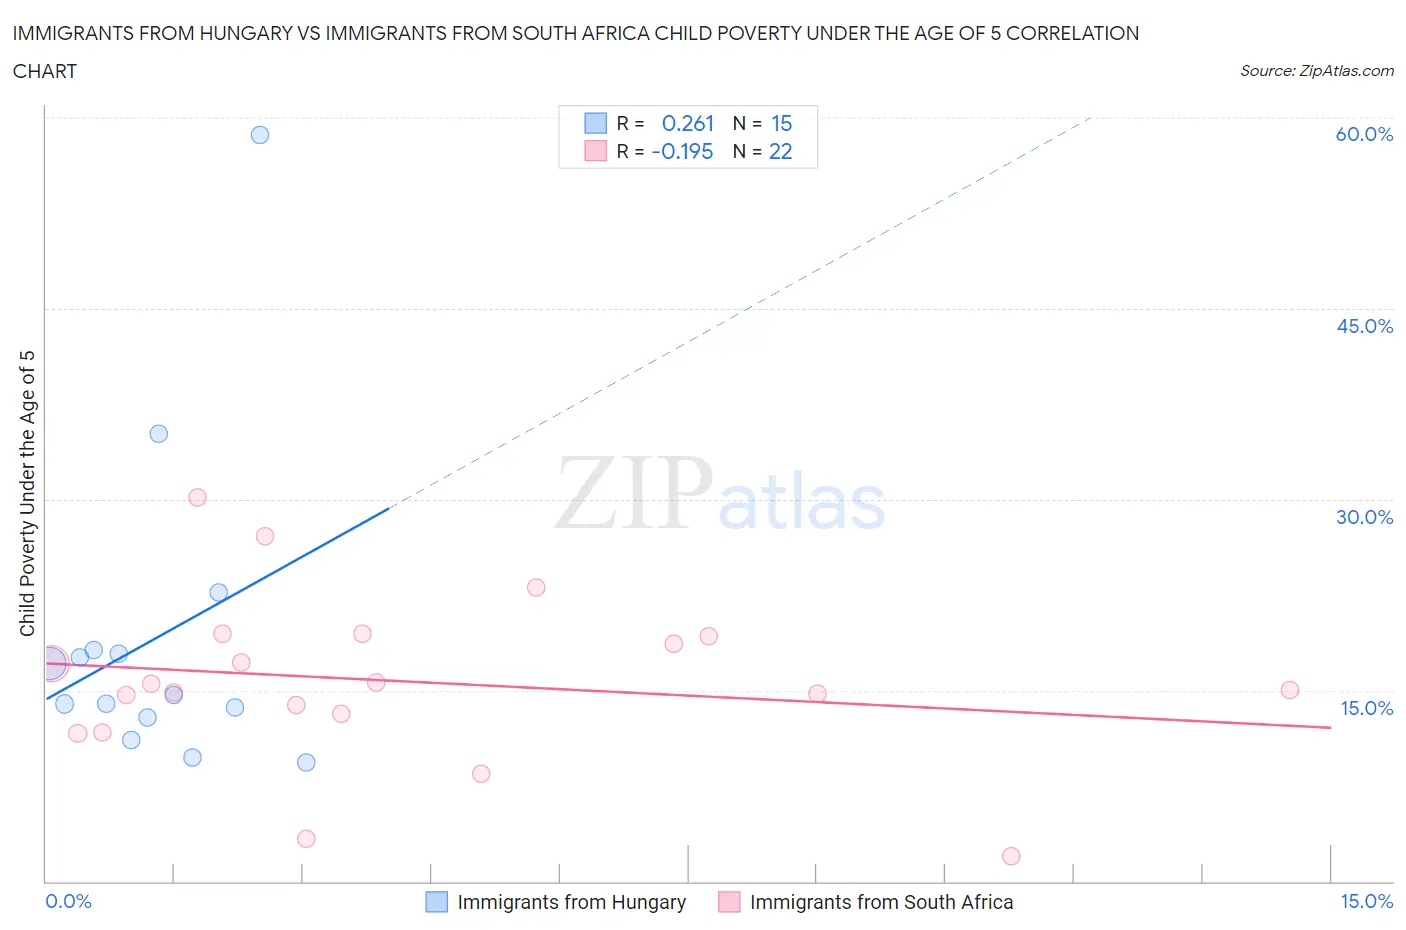 Immigrants from Hungary vs Immigrants from South Africa Child Poverty Under the Age of 5